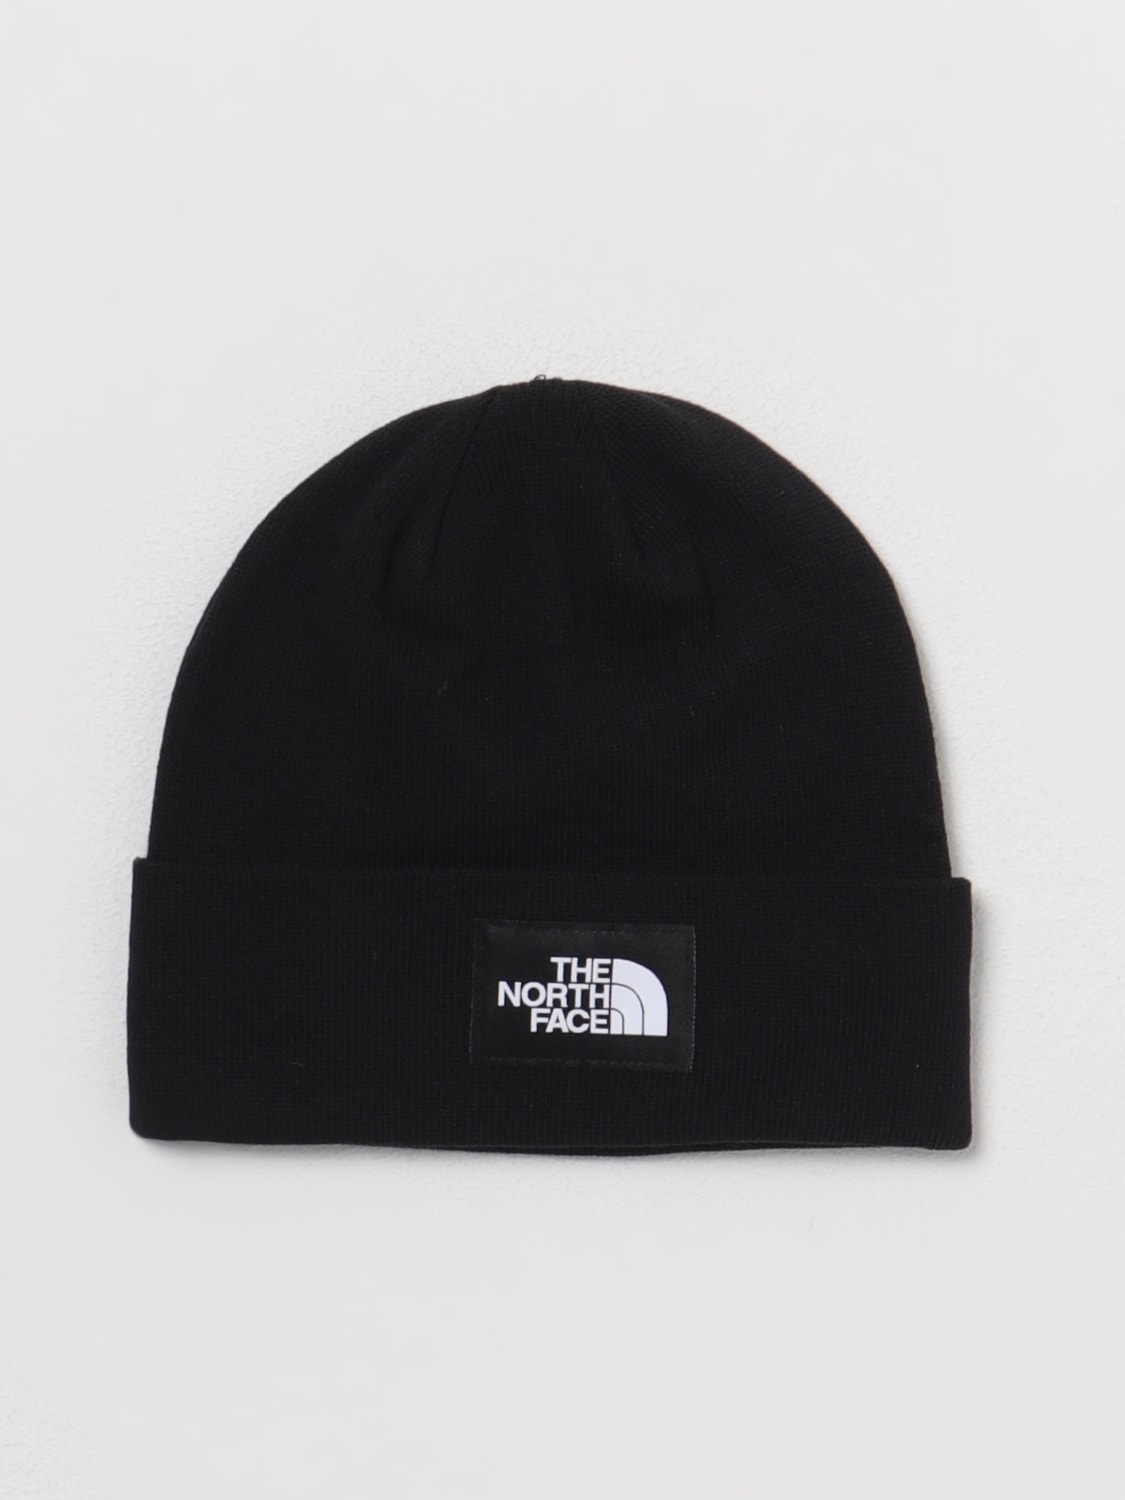 THE NORTH FACE: hat for man - Black | The North Face hat NF0A3FNT ...